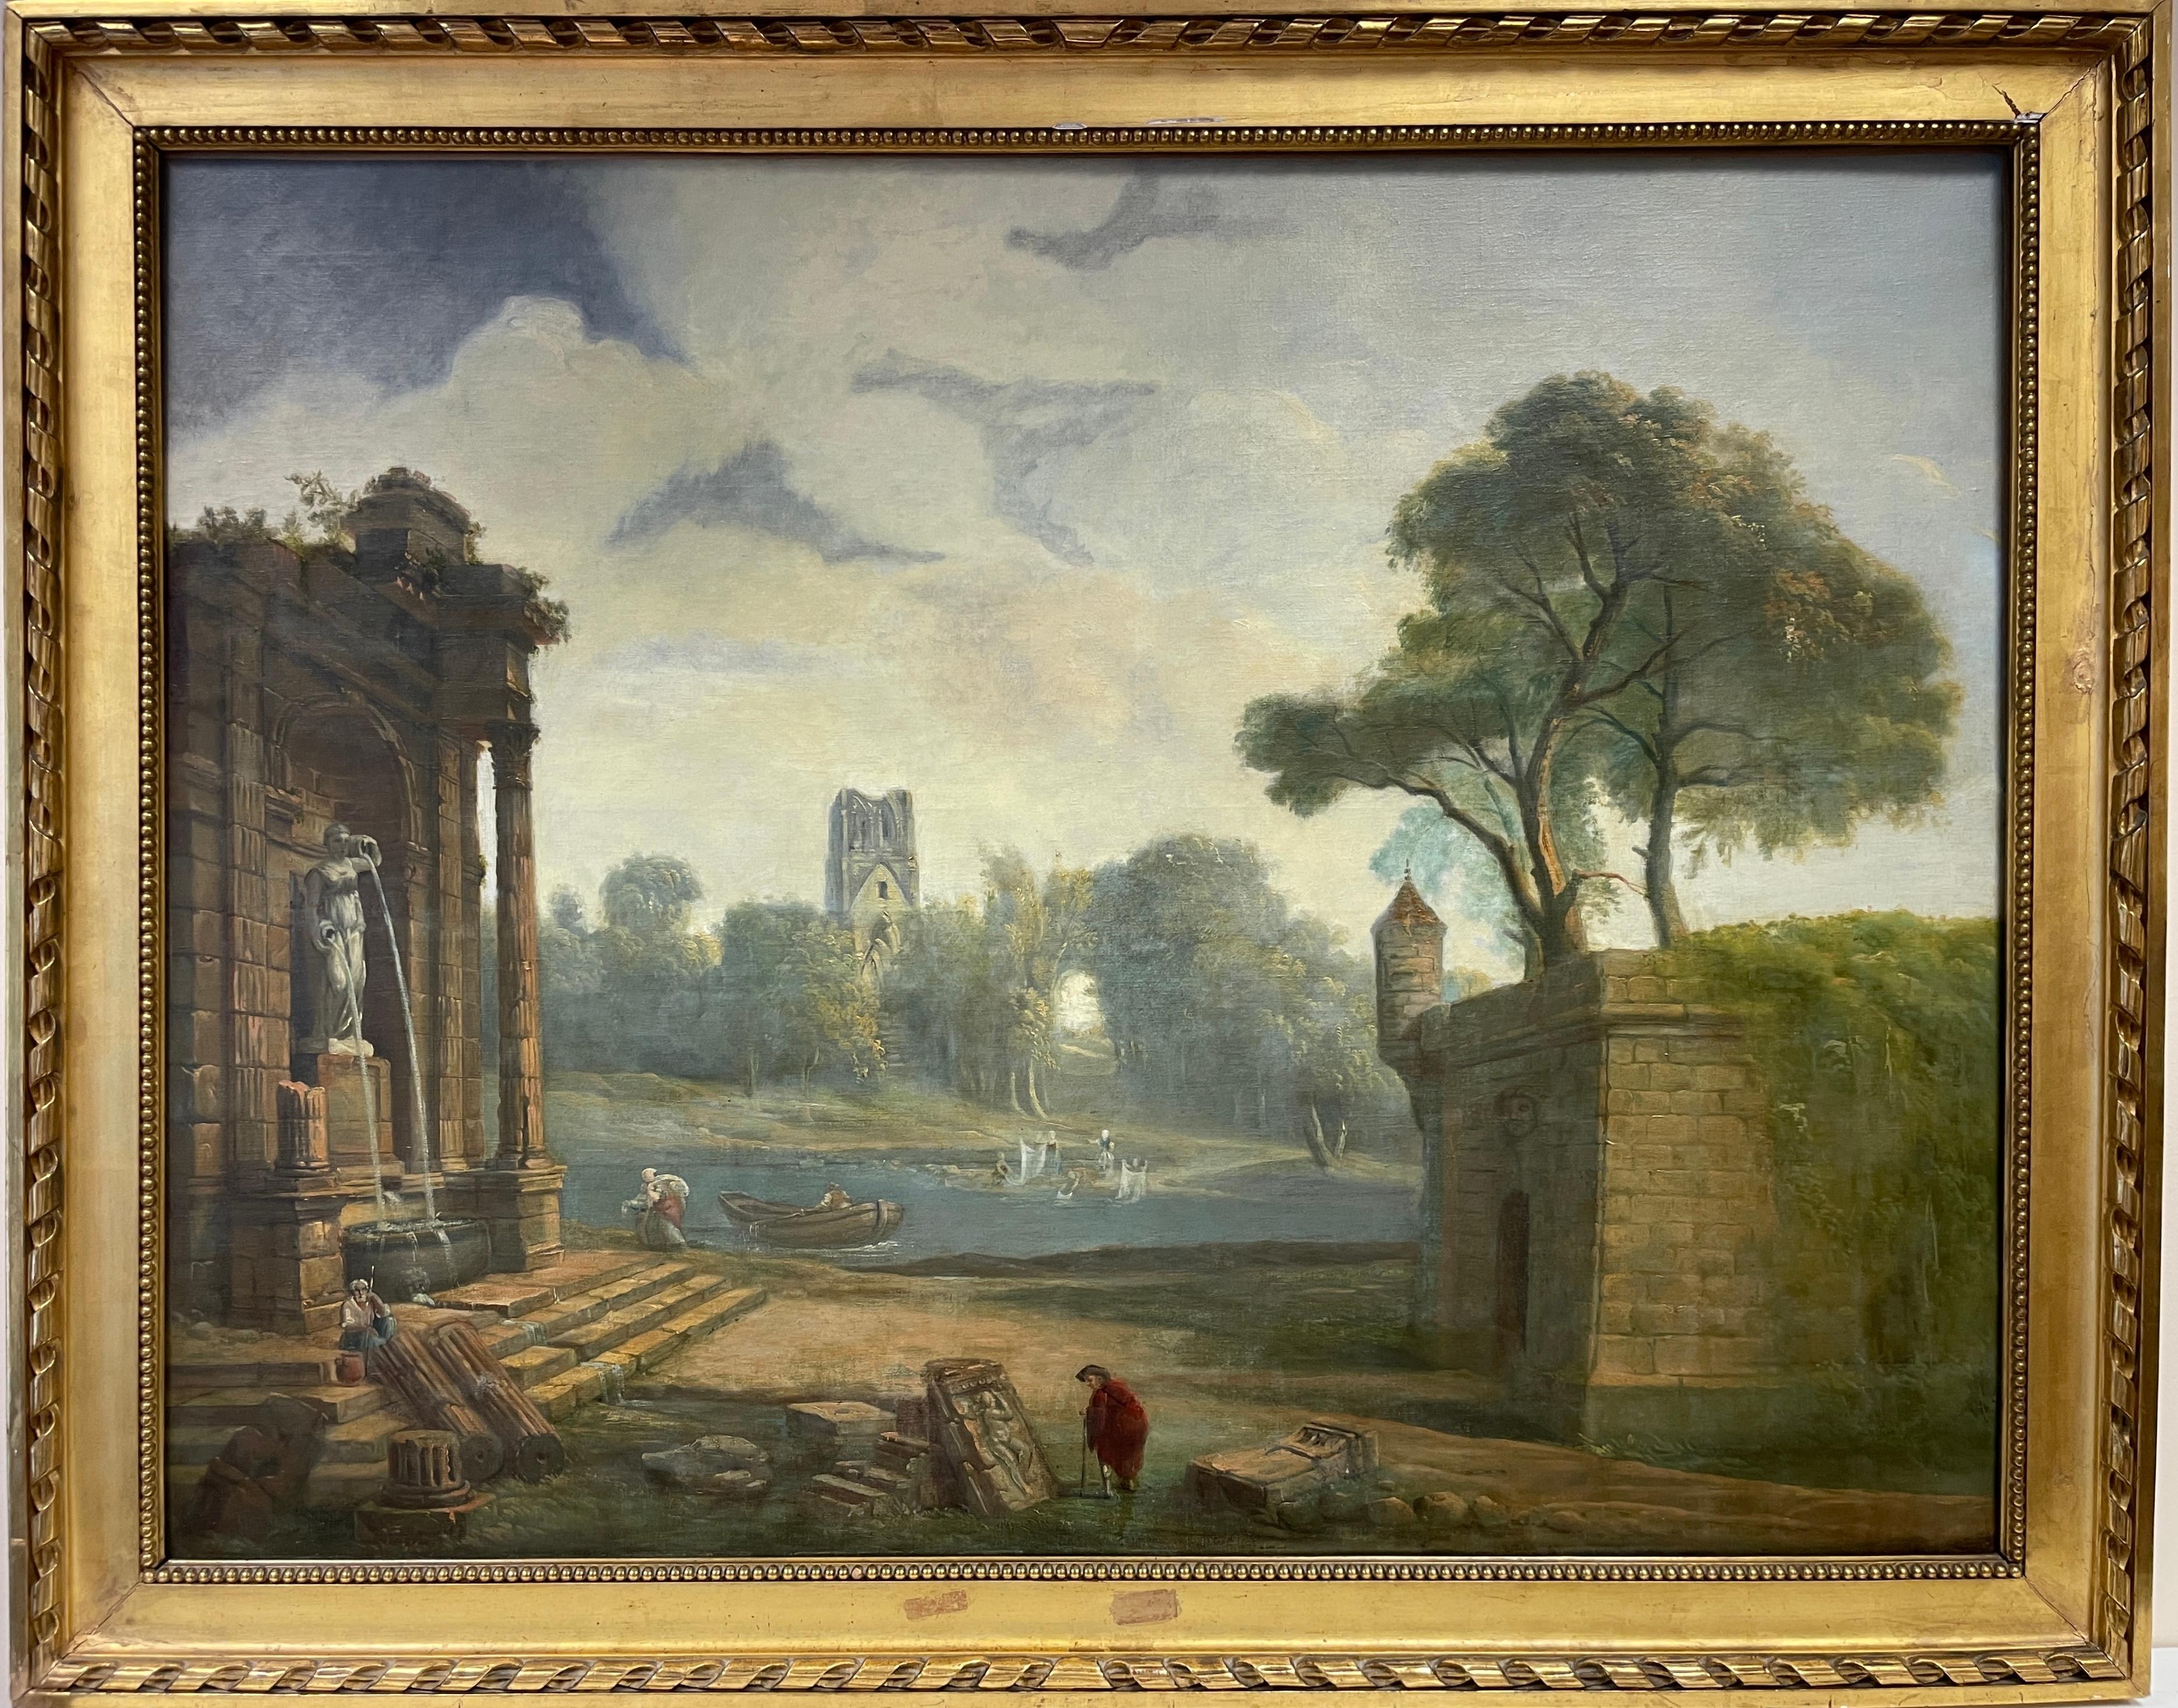 French Old Master Landscape Painting - Huge Classical Roman Ruins in Arcadian Landscape, 18th Century French Oil